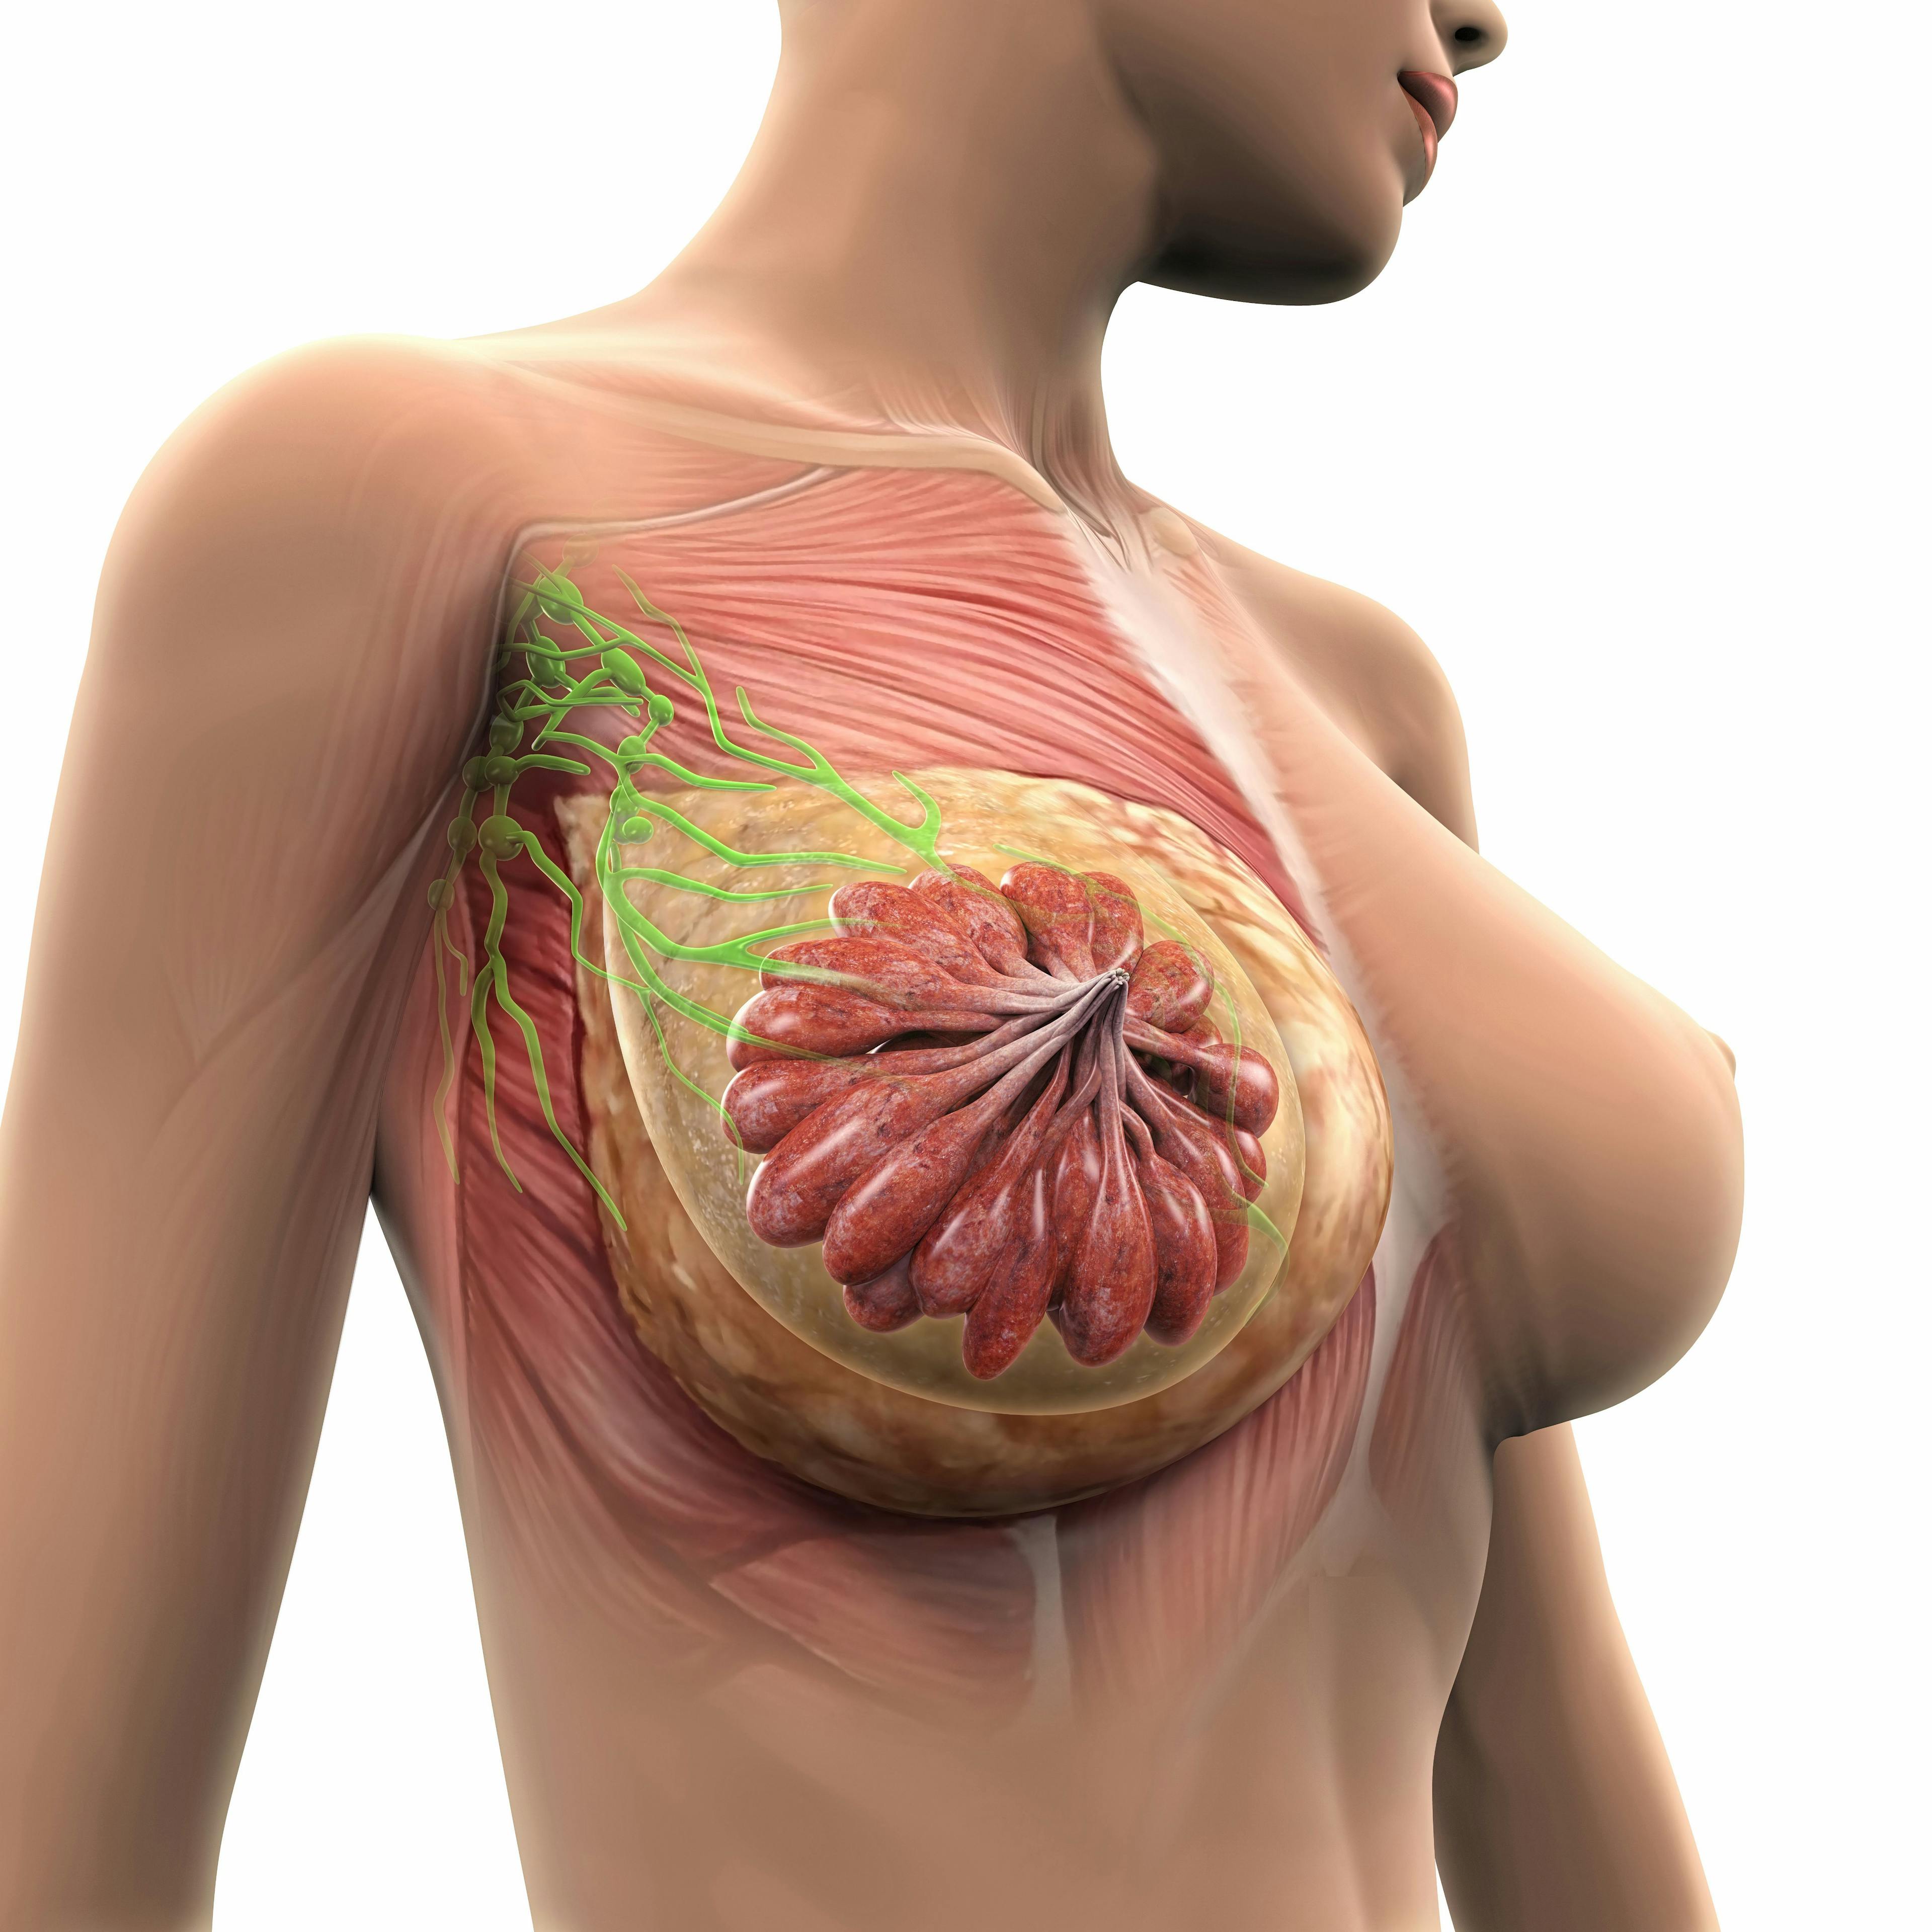 The FDA approved tucatinib plus trastuzumab and capecitabine for treating adult patients with advanced HER2-positive breast cancer who have received 1 or more prior lines of therapy in April 2020.